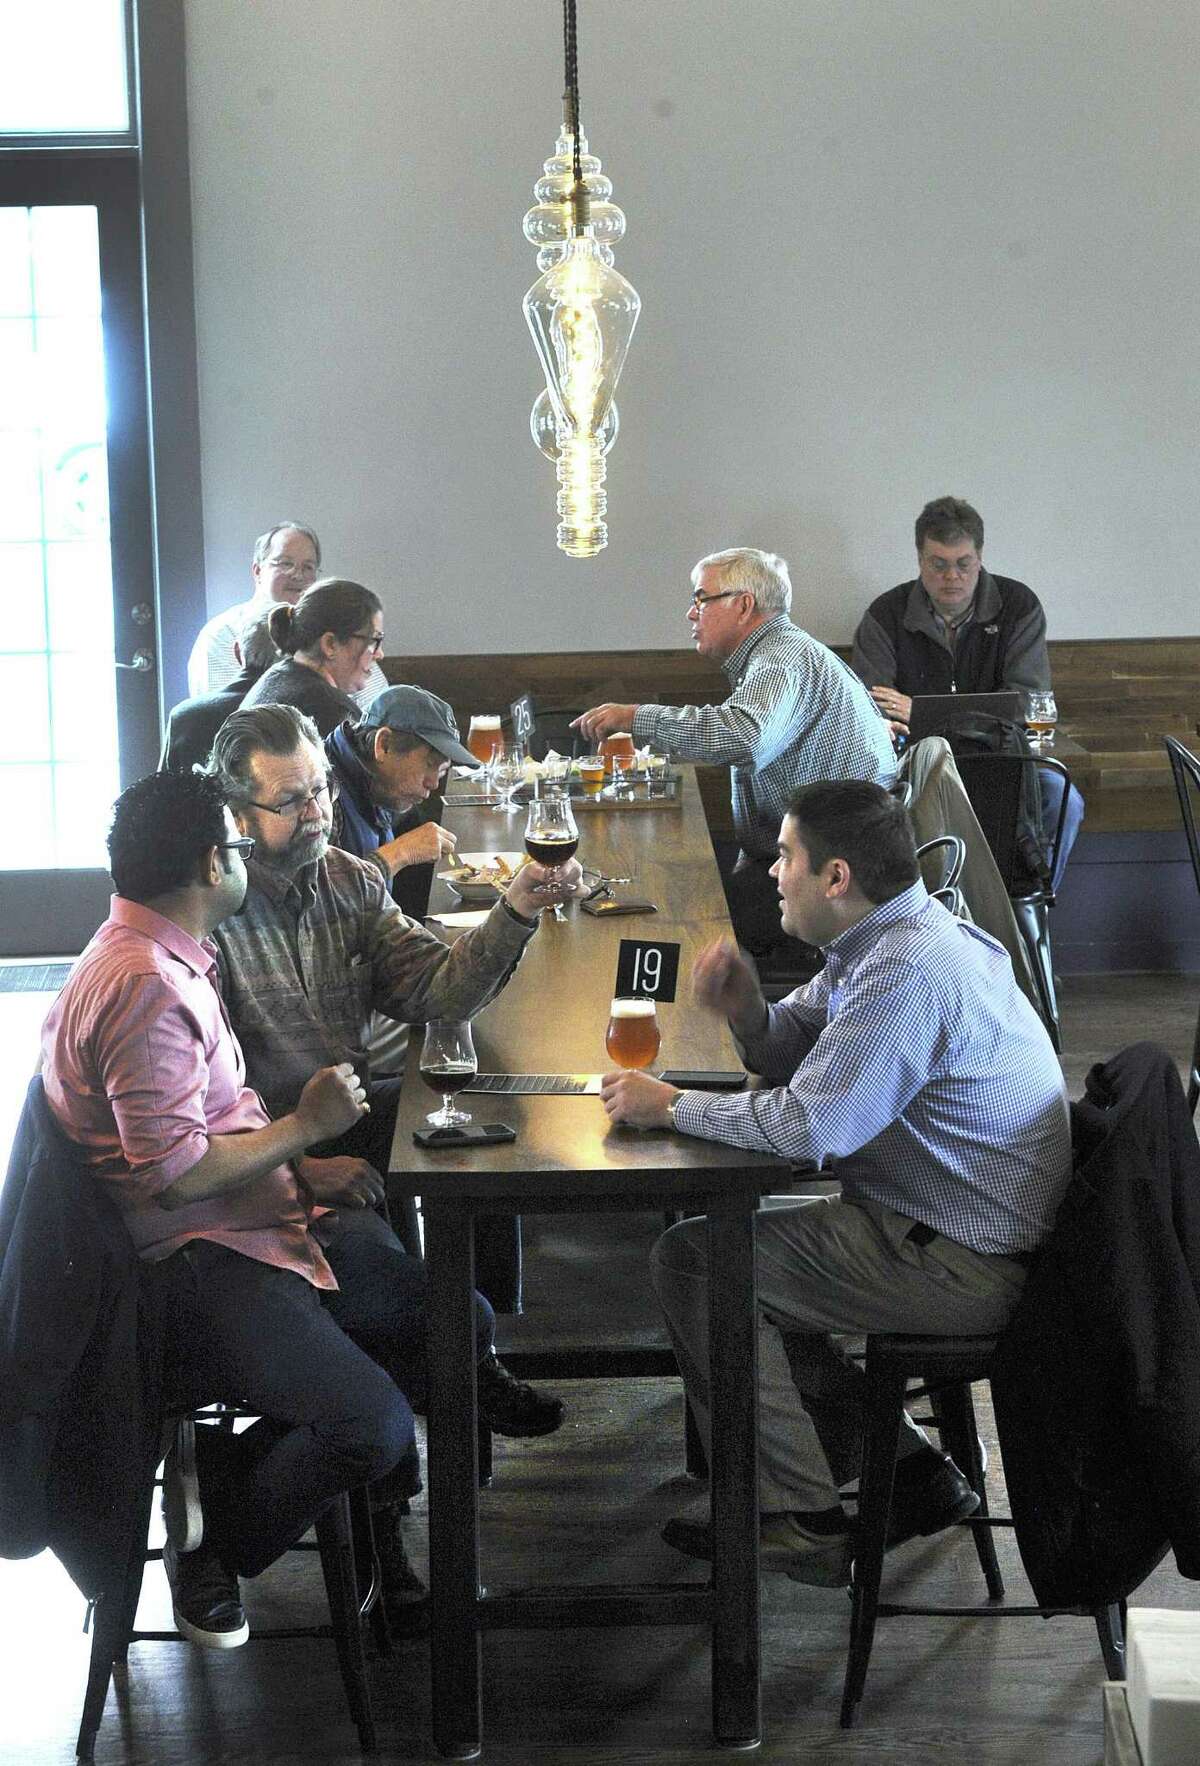 A lunch-time crowd at the Broken Symmetry Gastro Brewery in Bethel, which recently opened in a building that was once the Bethel Train Station. Photo Thursday, march 29, 2018.